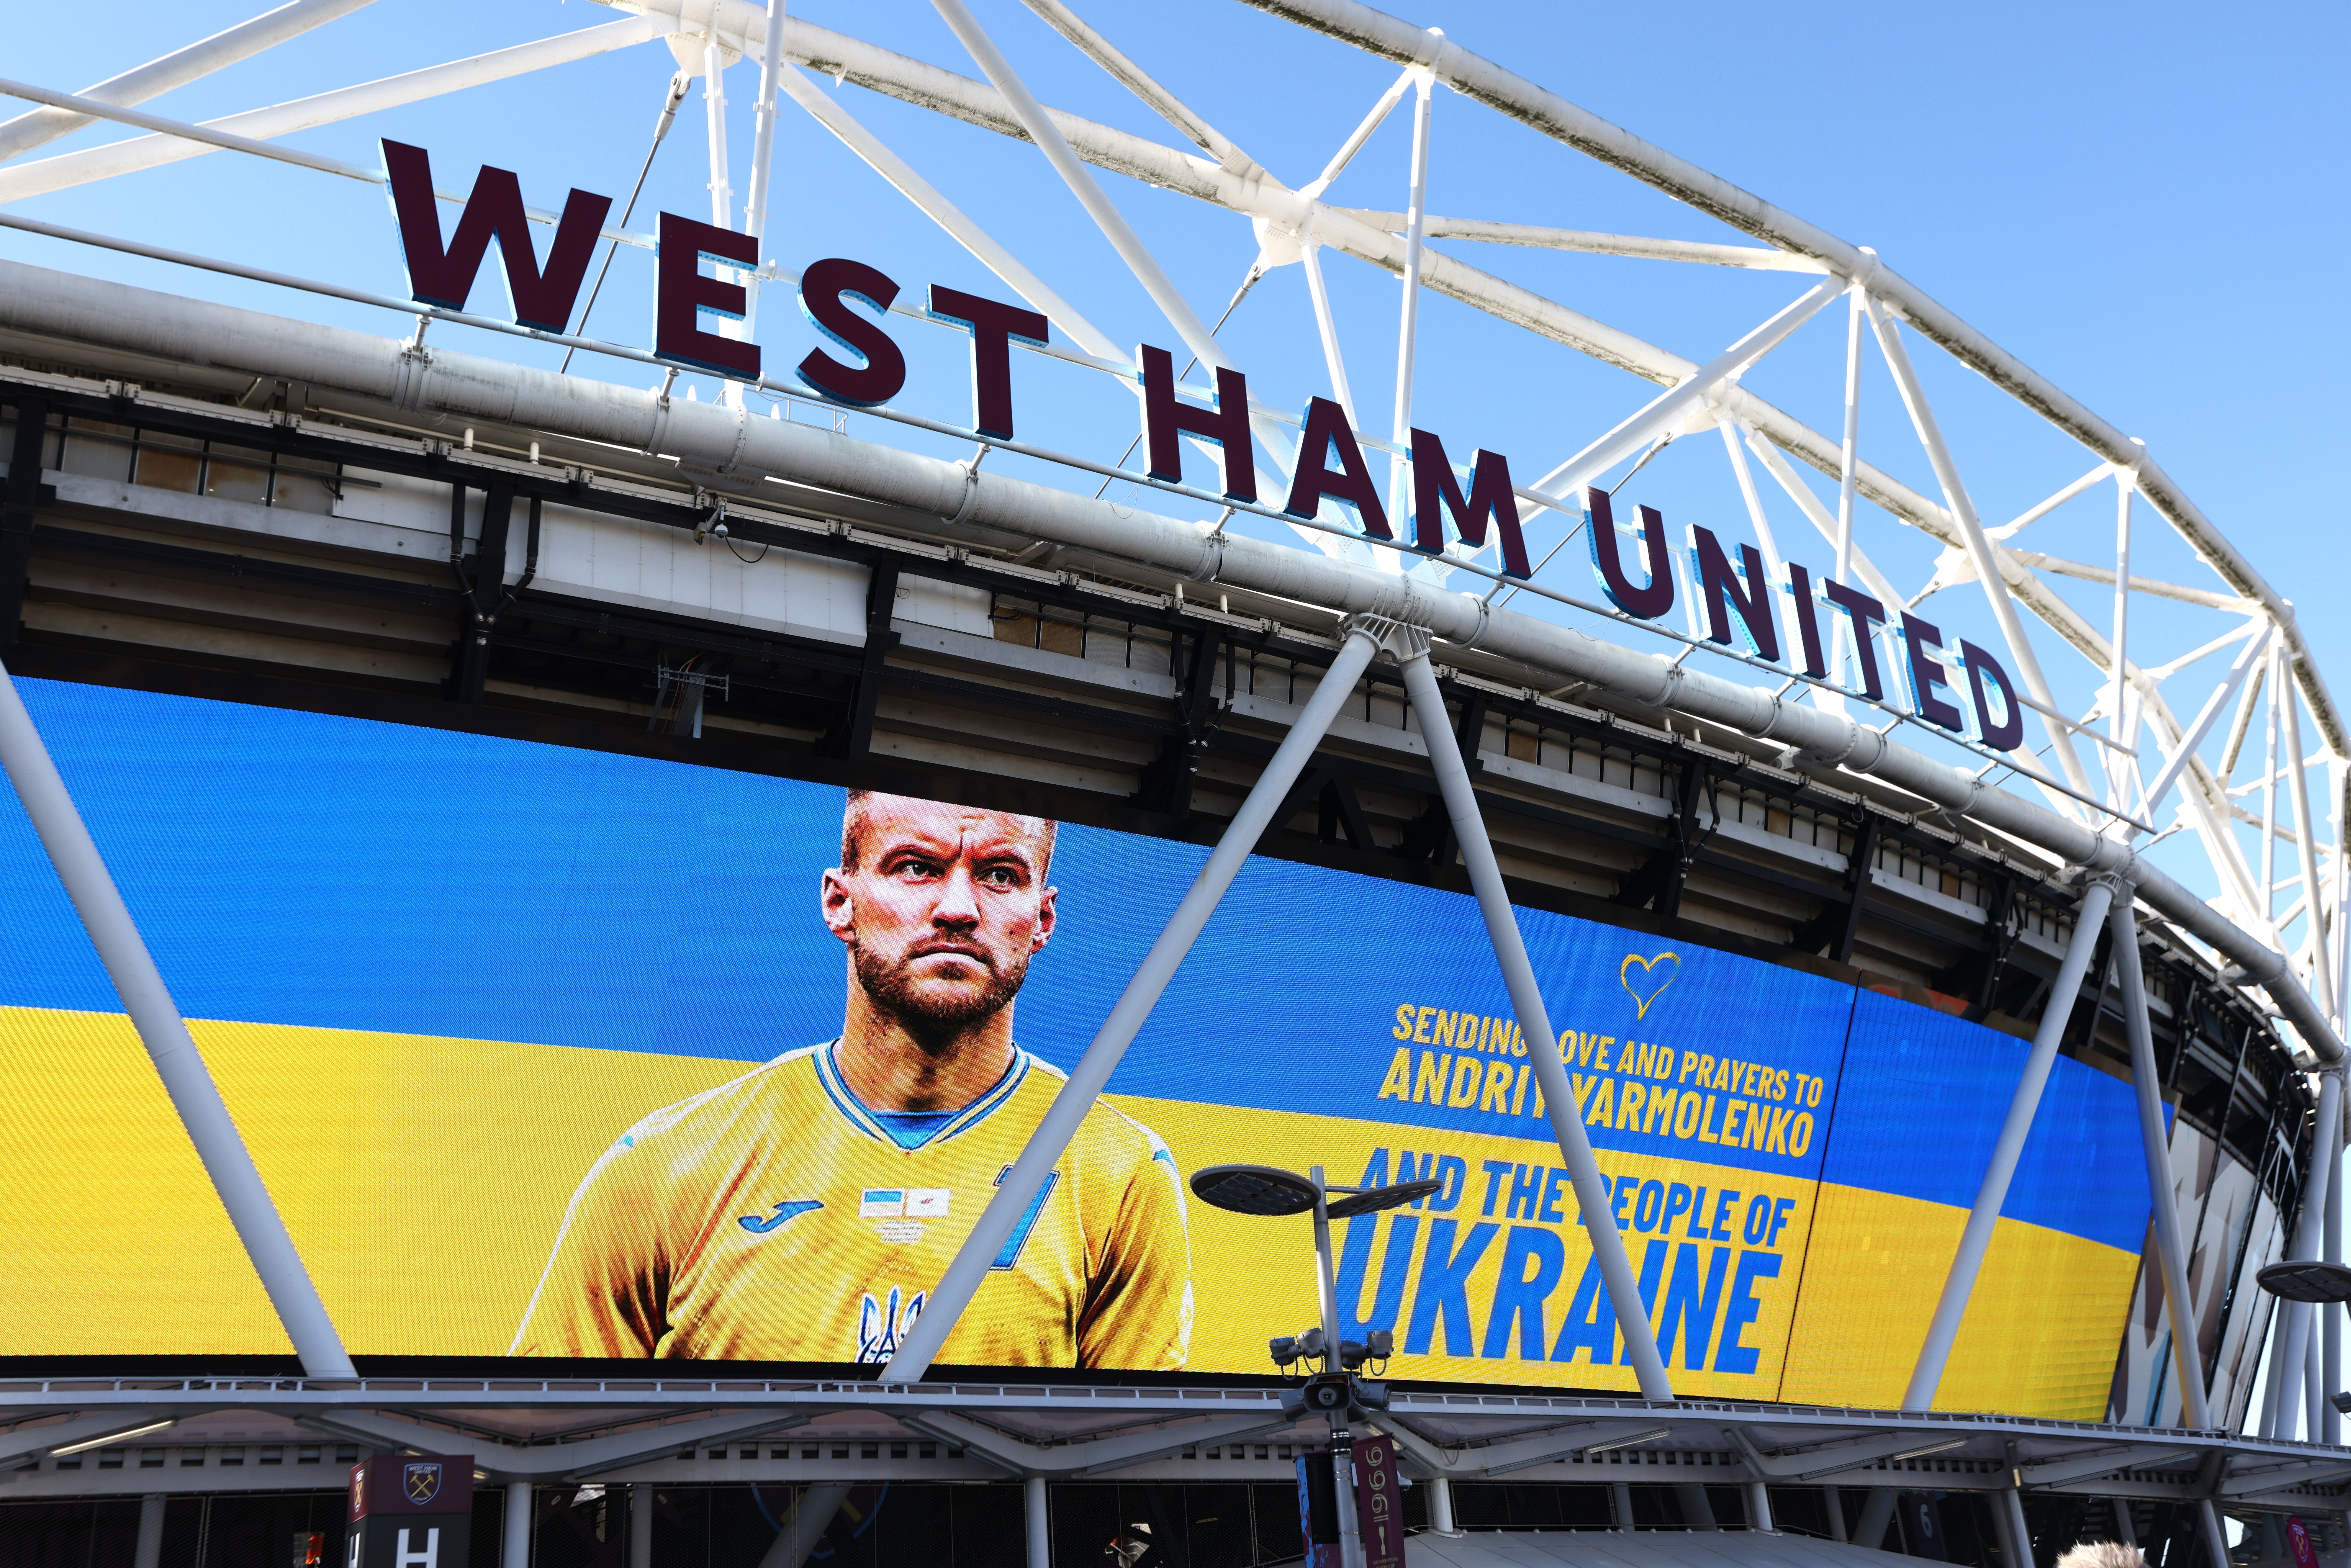 West Ham displayed a message of support to Andriy Yarmolenko